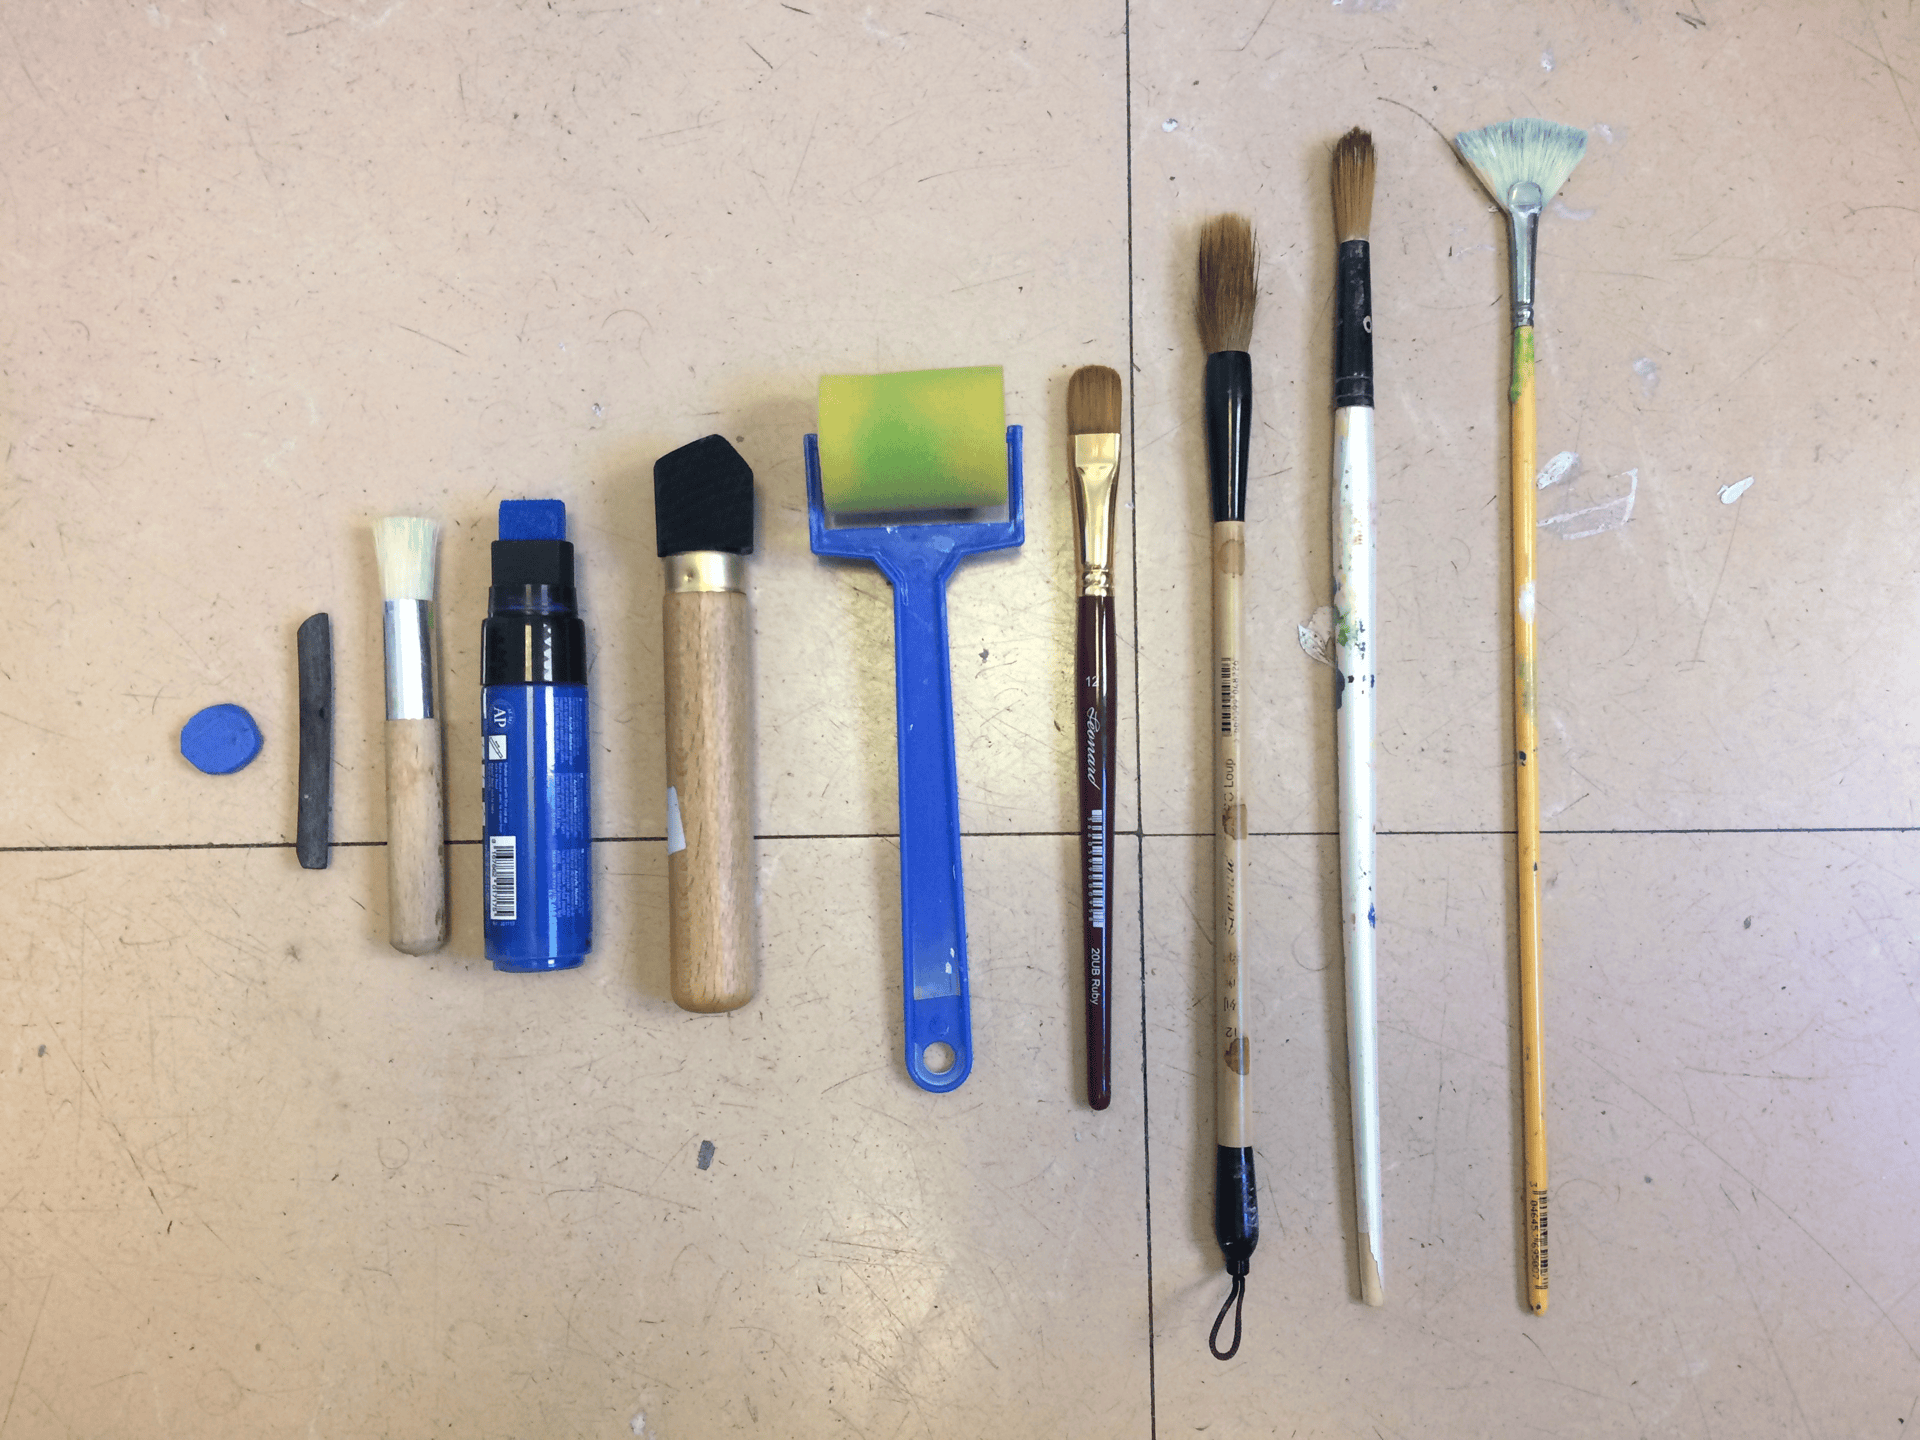 An image of various tools sorted from smallest to biggest. From left to right: tailor’s chalk, carbon, brush, Posca pen, carbon mounted to a stick, soft roller, brush, chinese brush, fine brush, wide brush.